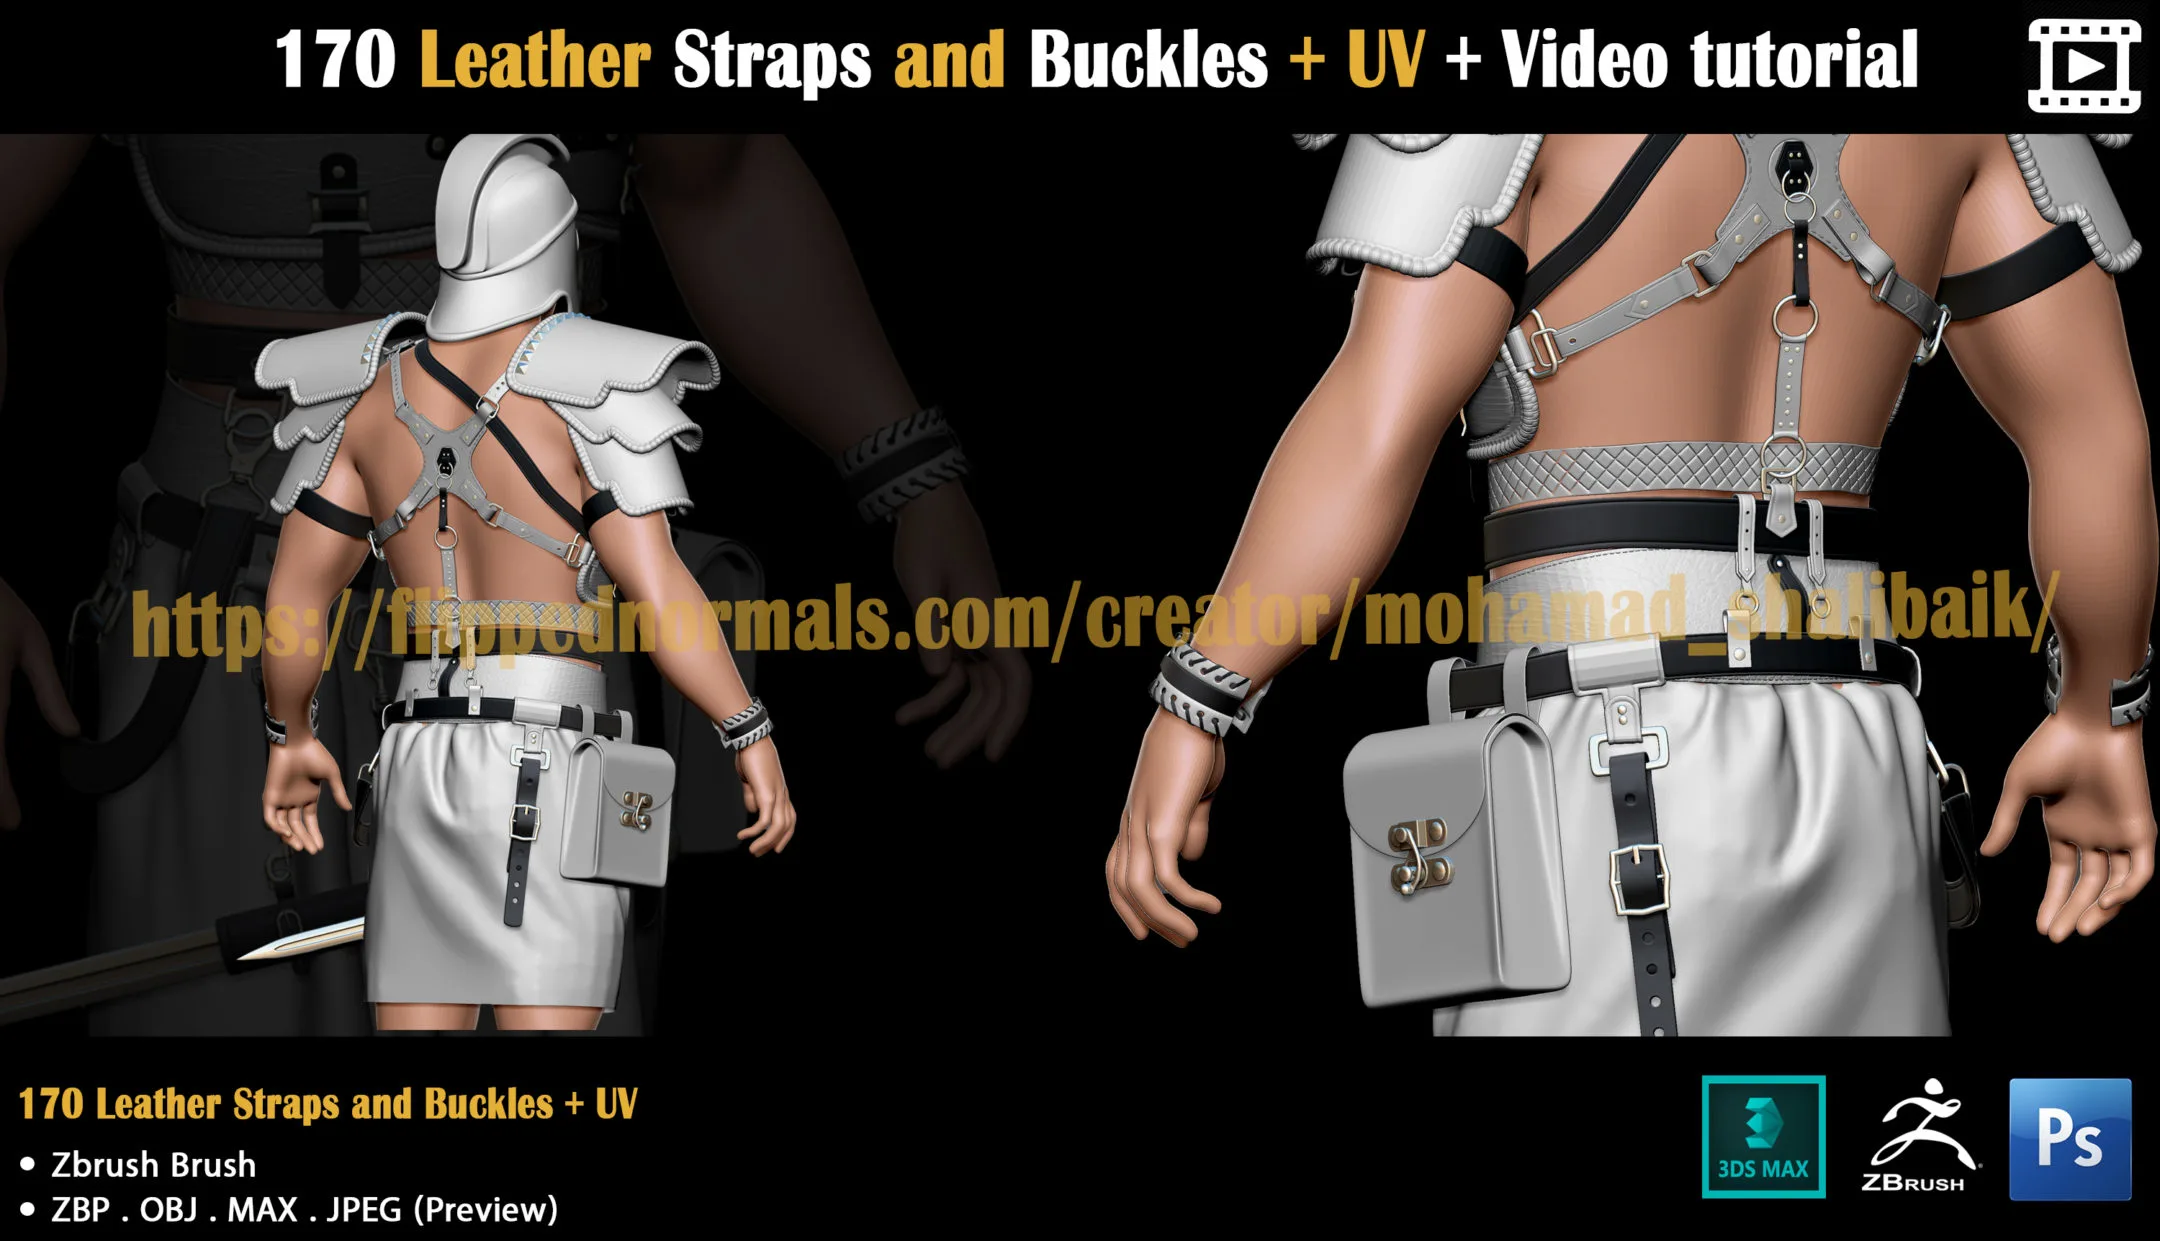 170 Leather Straps and Buckles + UV + Video tutorial